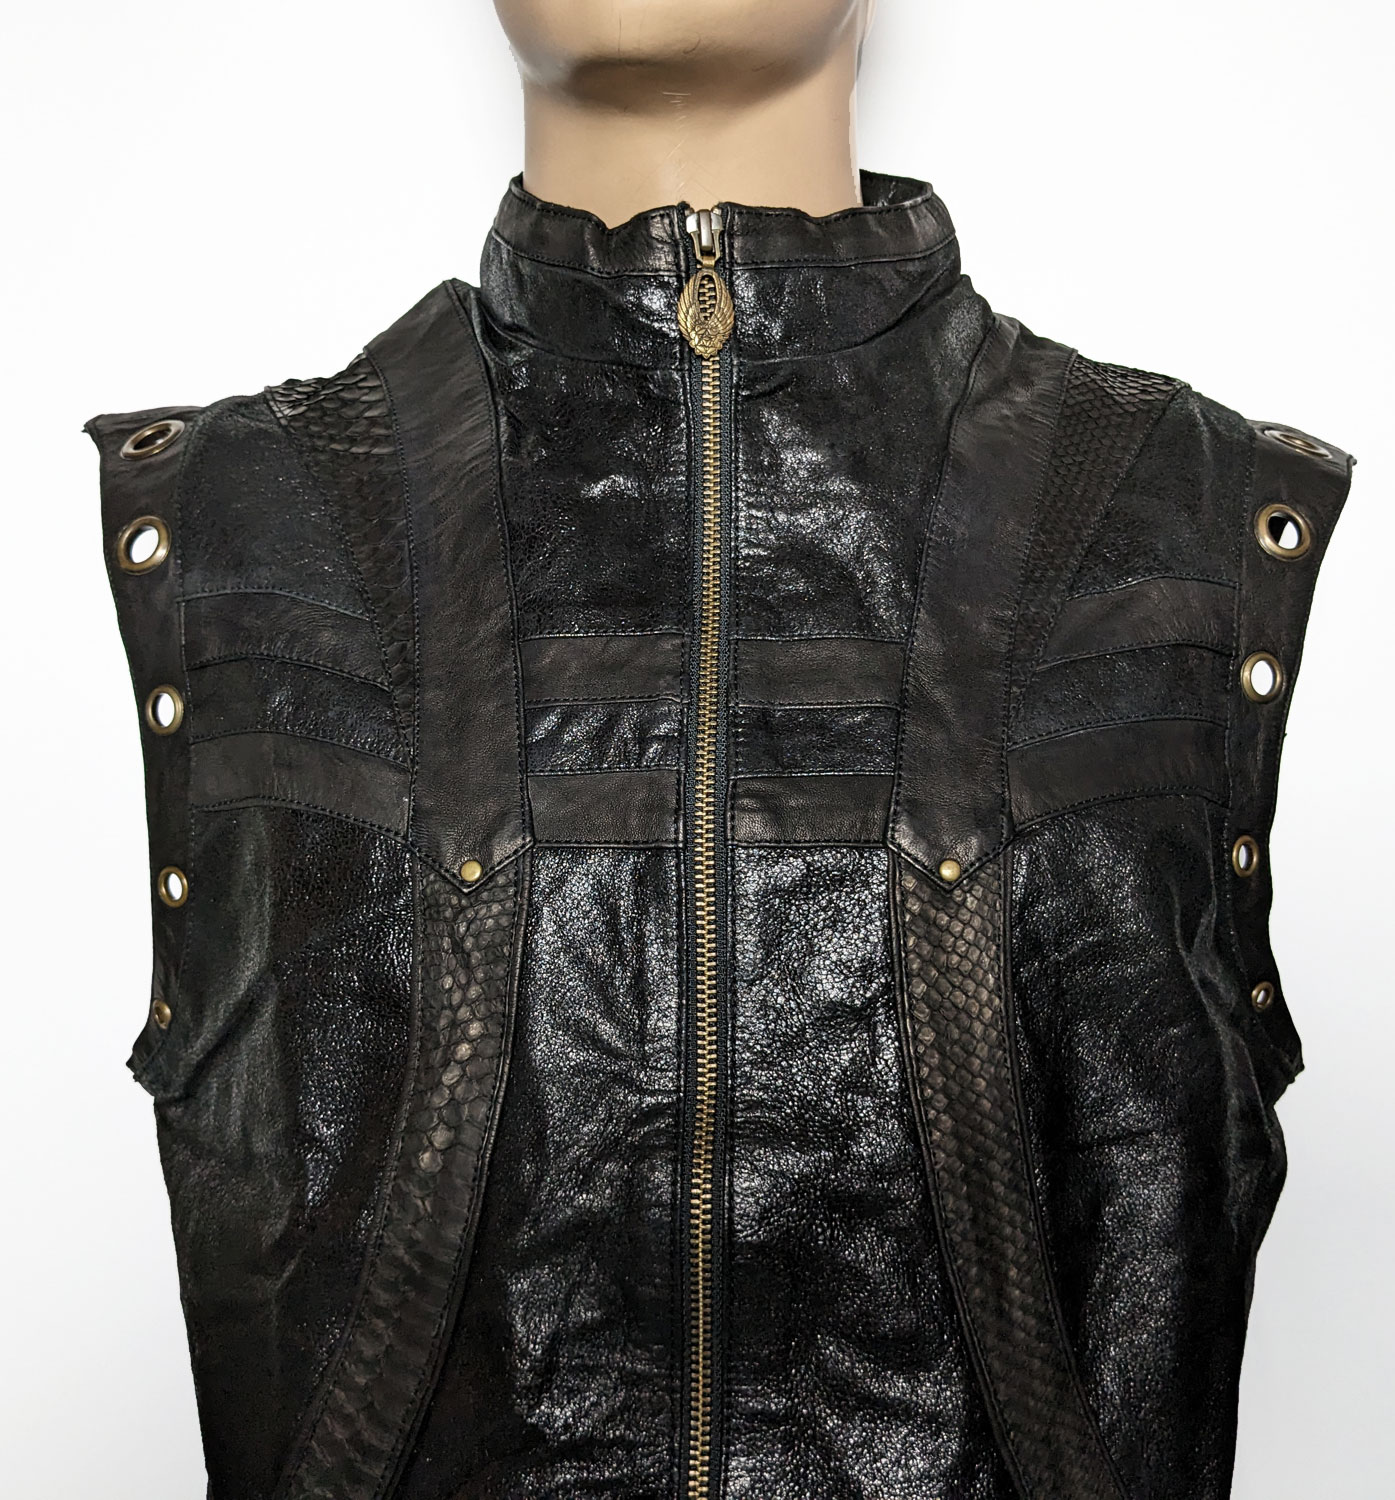 Taurid Leather and Python Vest - anahata designs/infiniti now